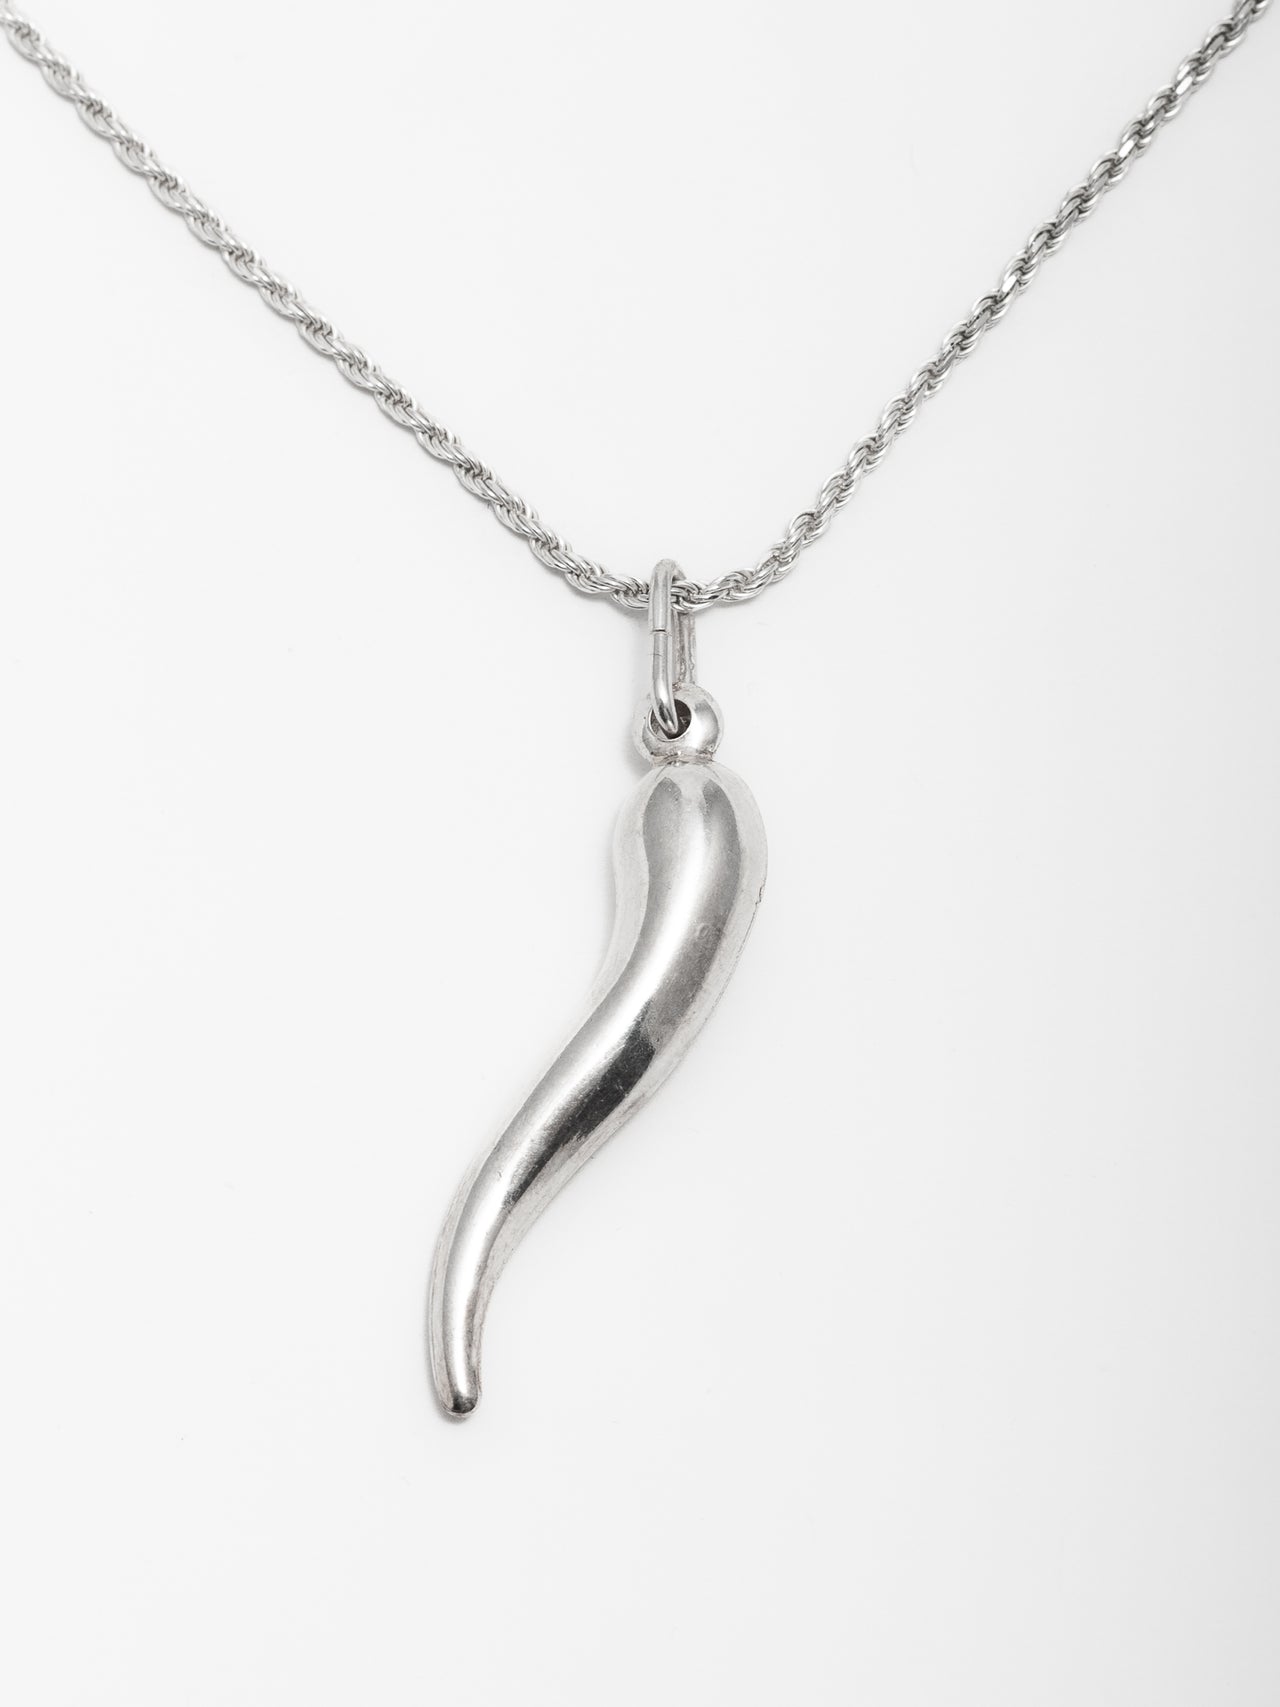 Sterling Silver Italian Horn Necklace pictured on chain. Light grey background. 